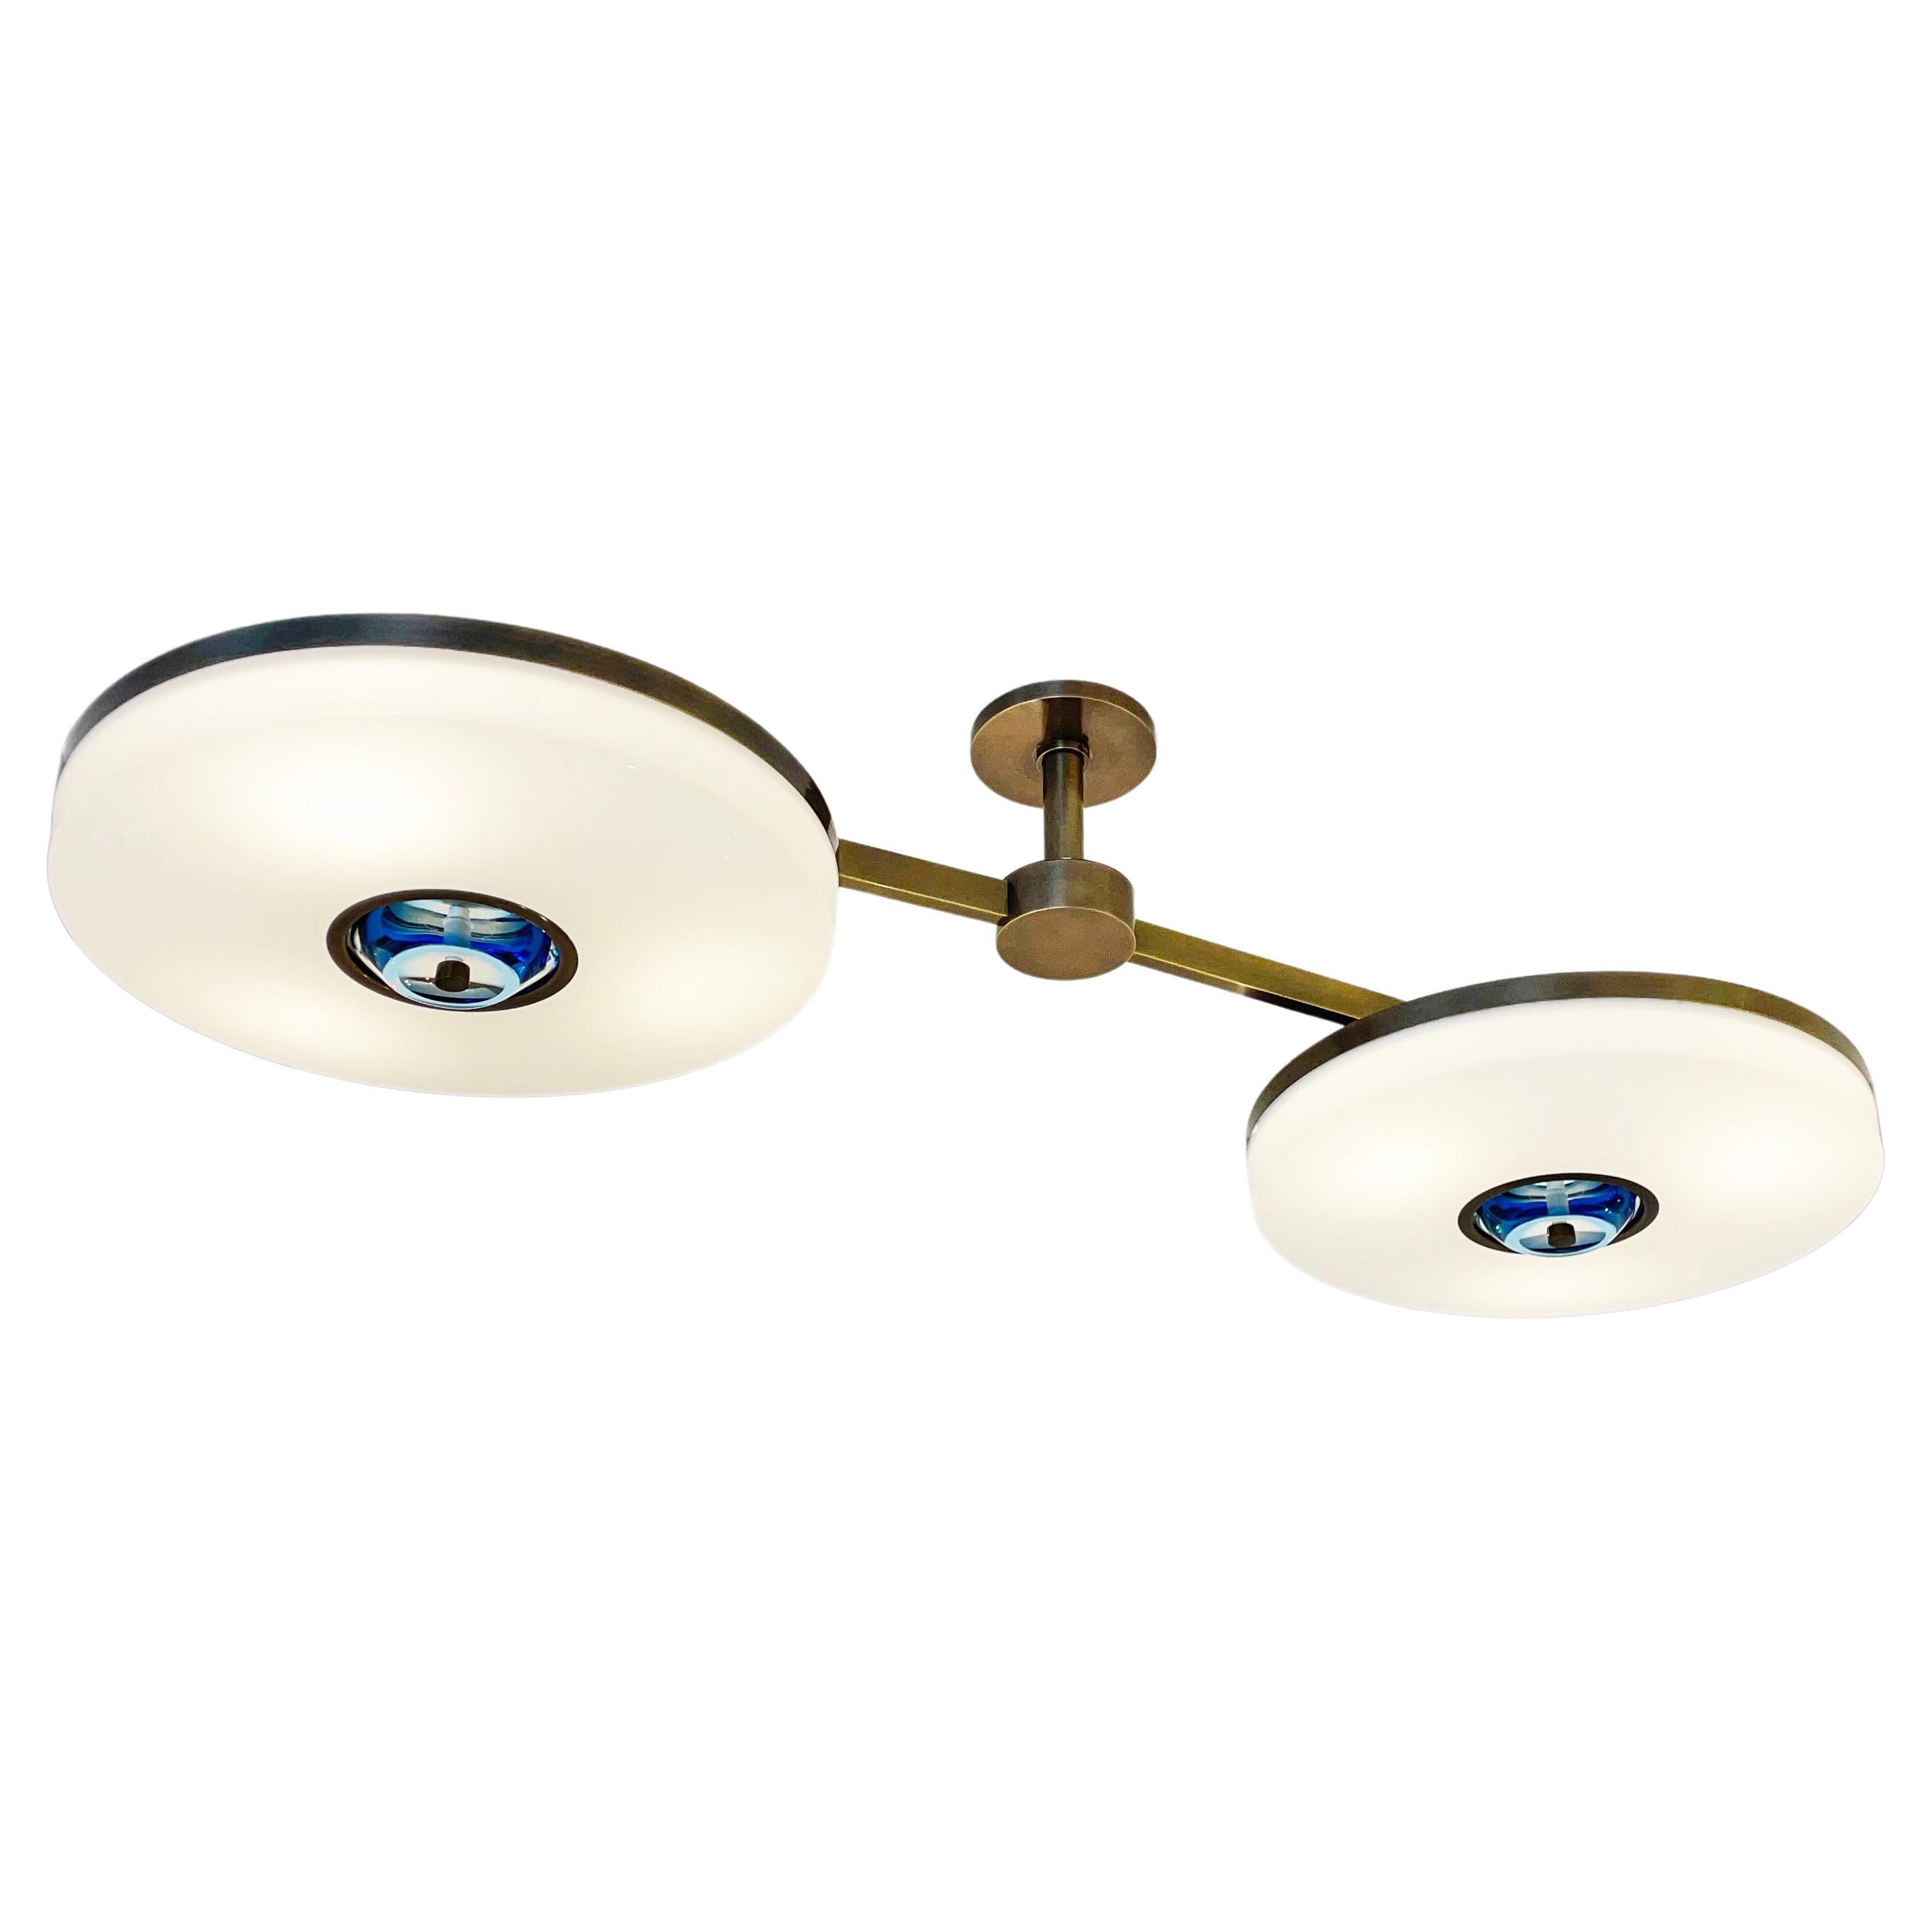 Iris N. 2 Ceiling Light by Gaspare Asaro For Sale